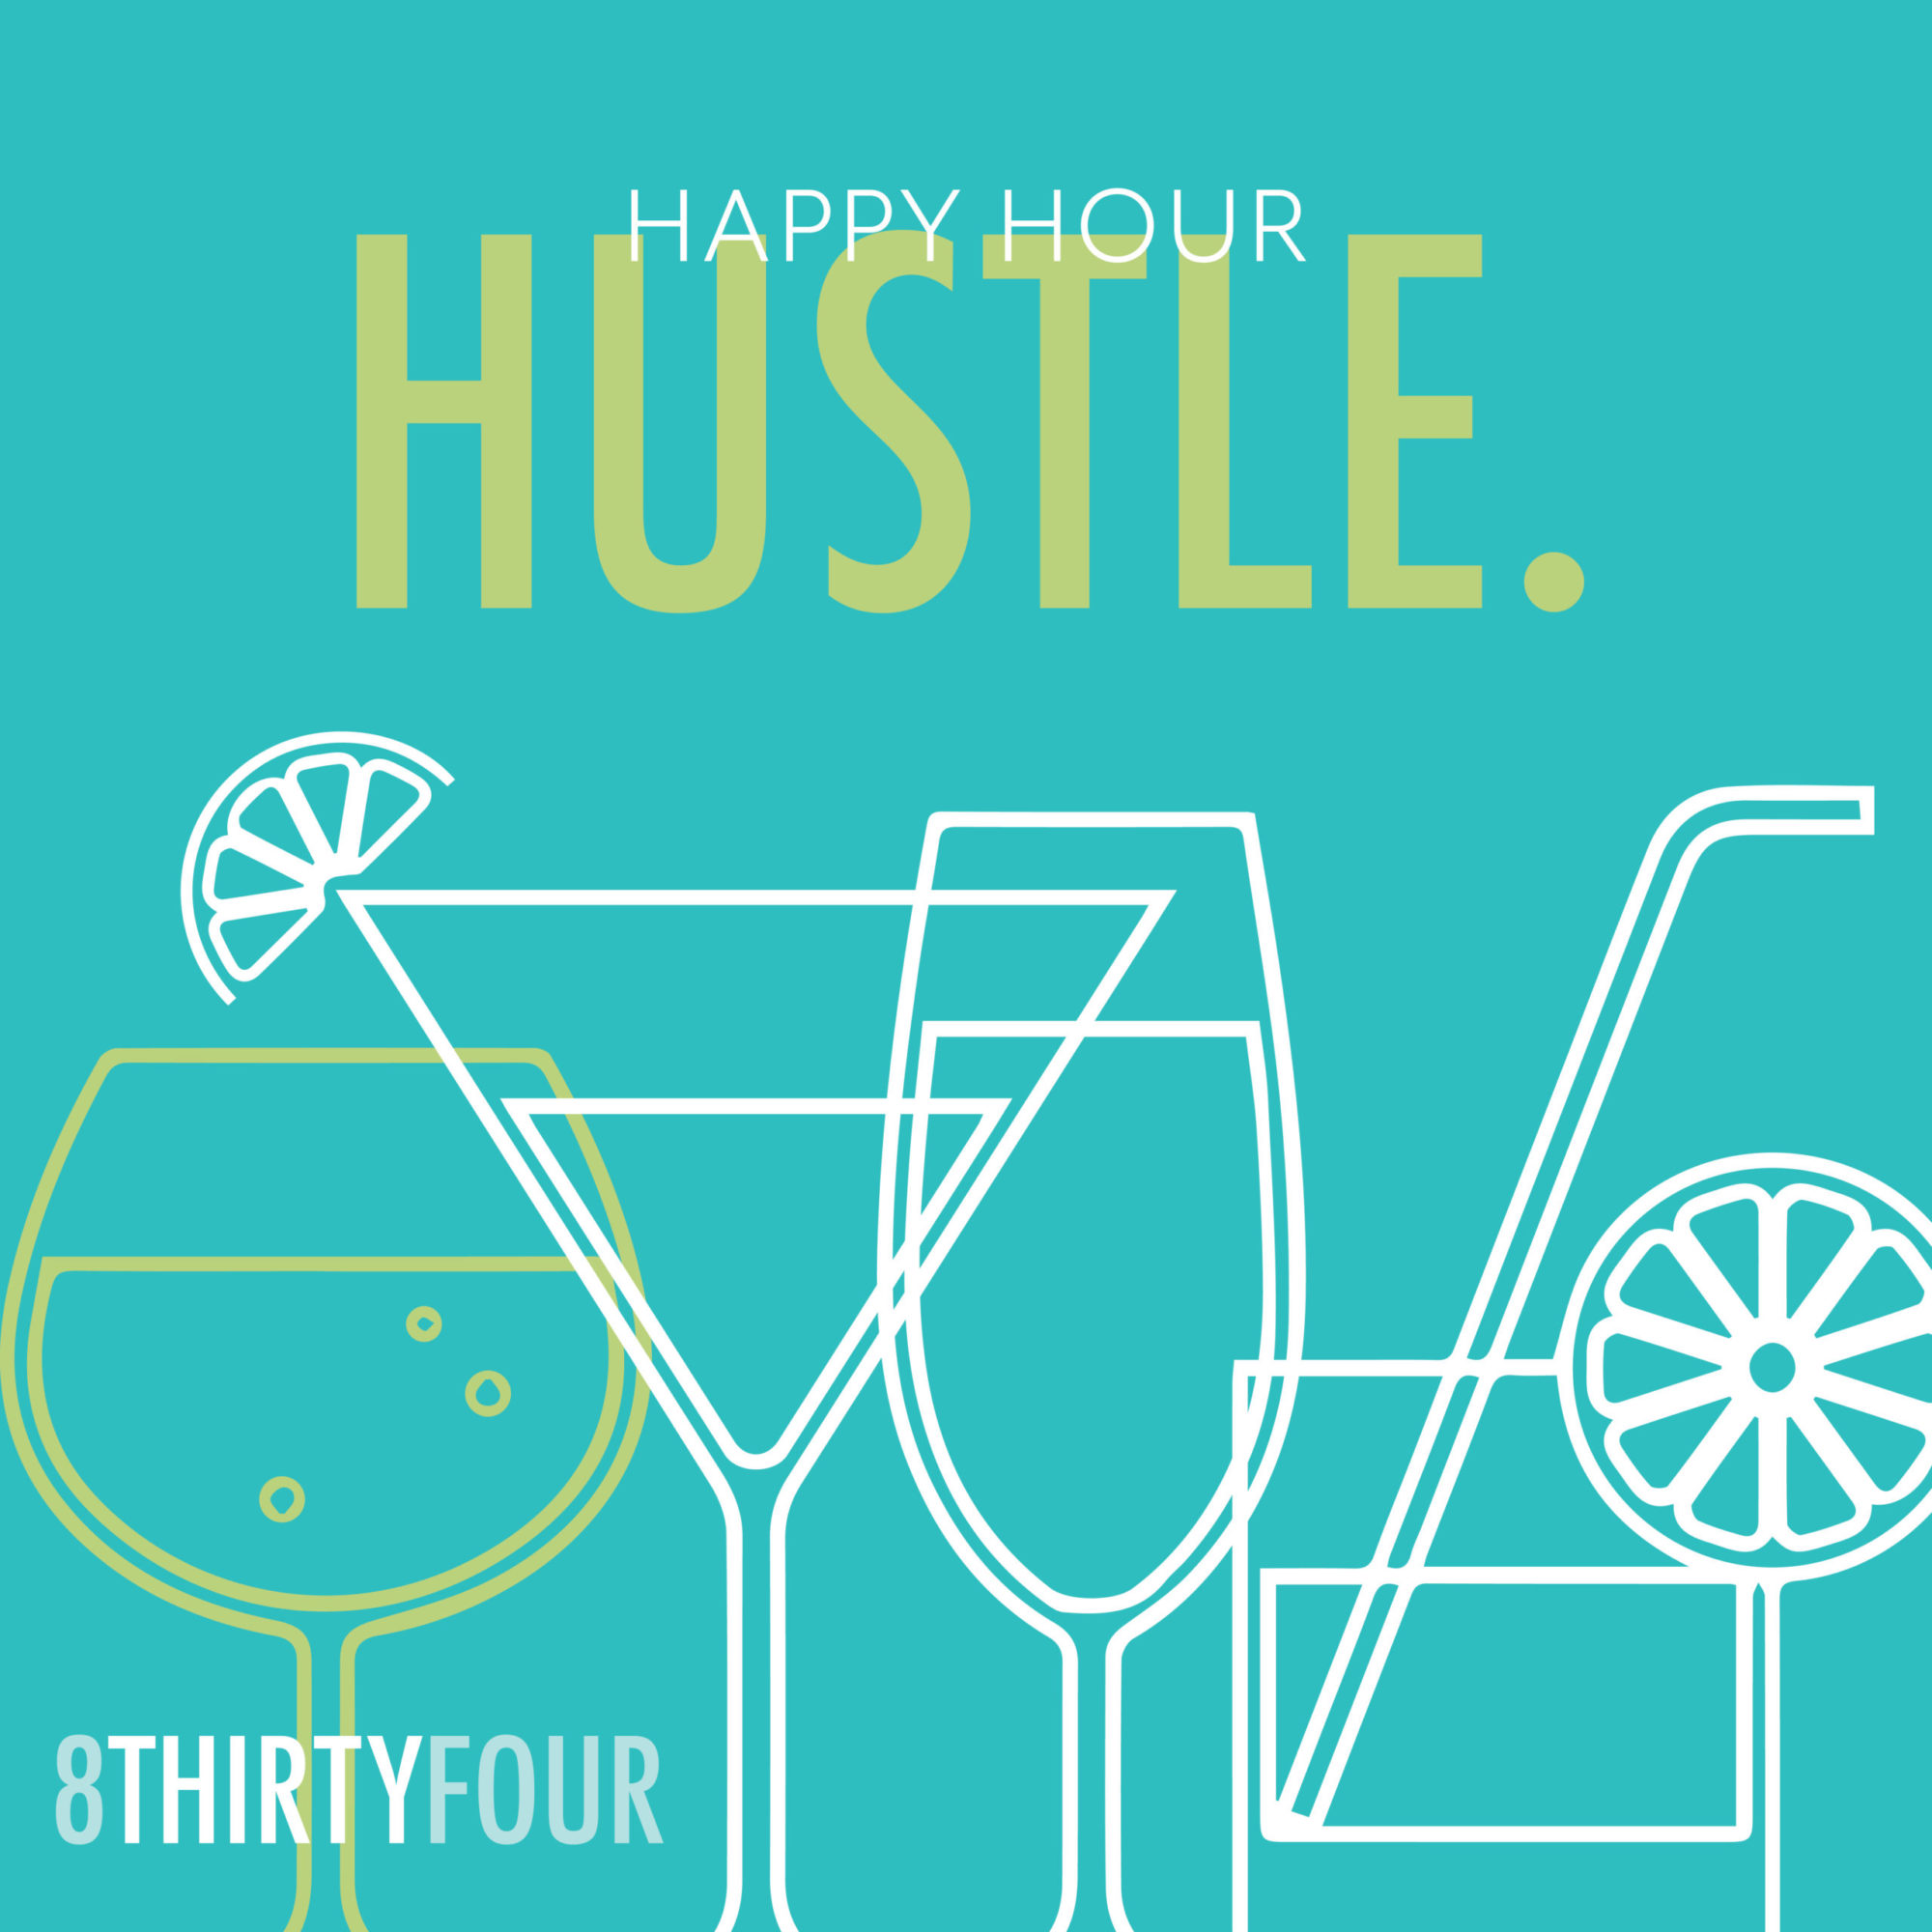 Various cartoon beverages cover the bottom of an image that reads, "Happy Hour Hustle. 8THIRTYFOUR"